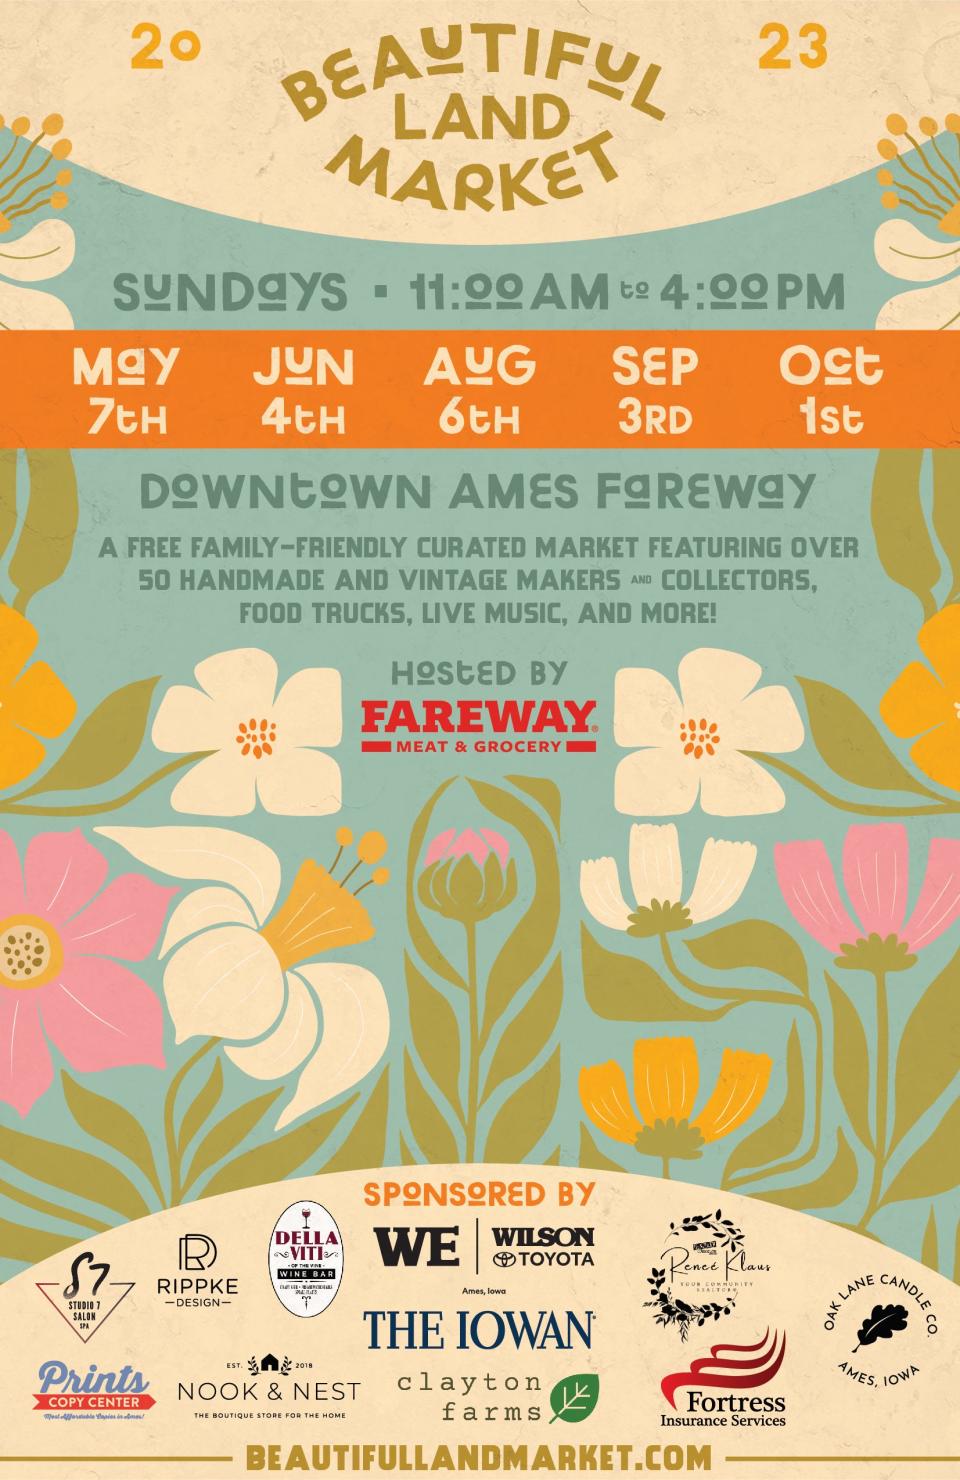 Beautiful Land Market will kick off its outdoor pop-up series Sunday at the downtown Ames Fareway's parking lot.